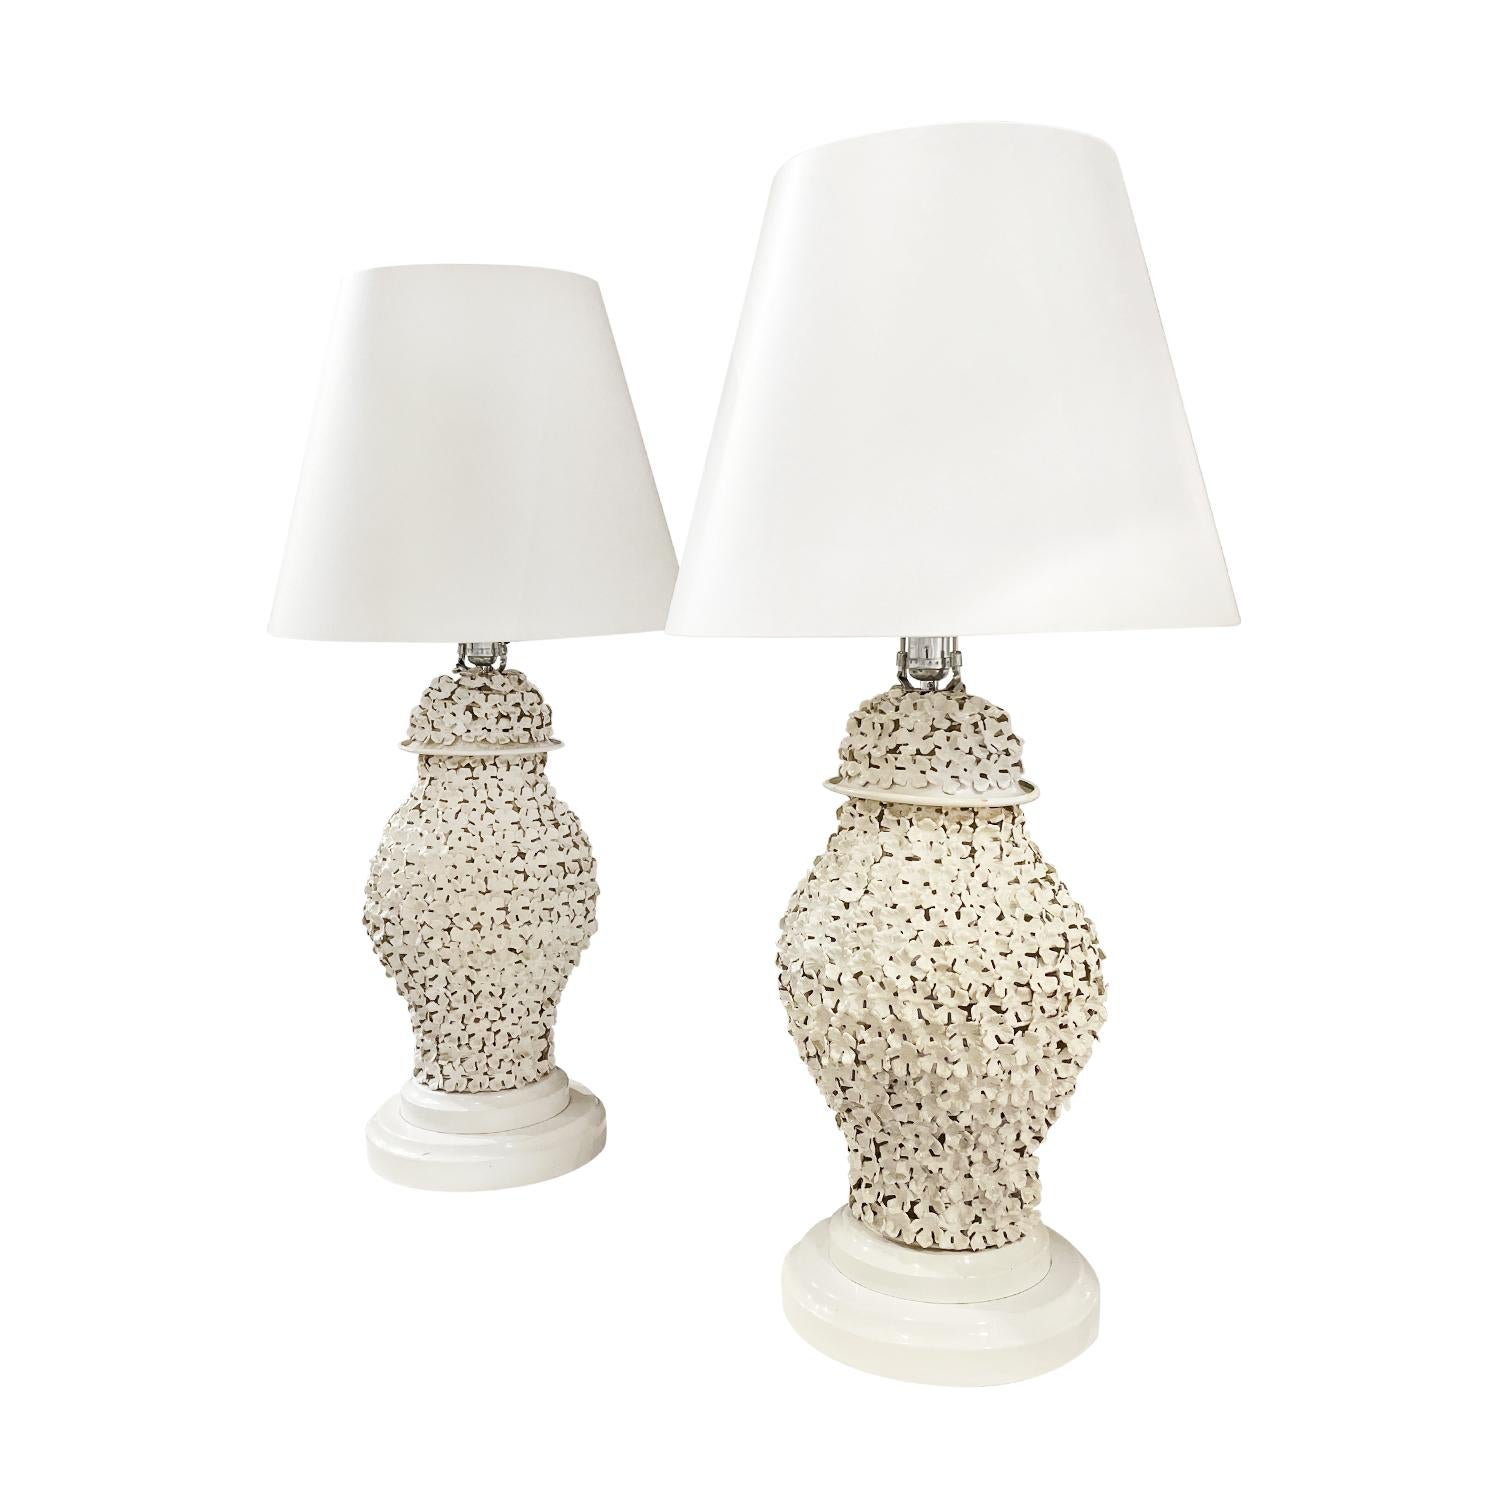 Art Deco 20th Century White French Pair of Floral Porcelain Table Lamps, Vintage Light